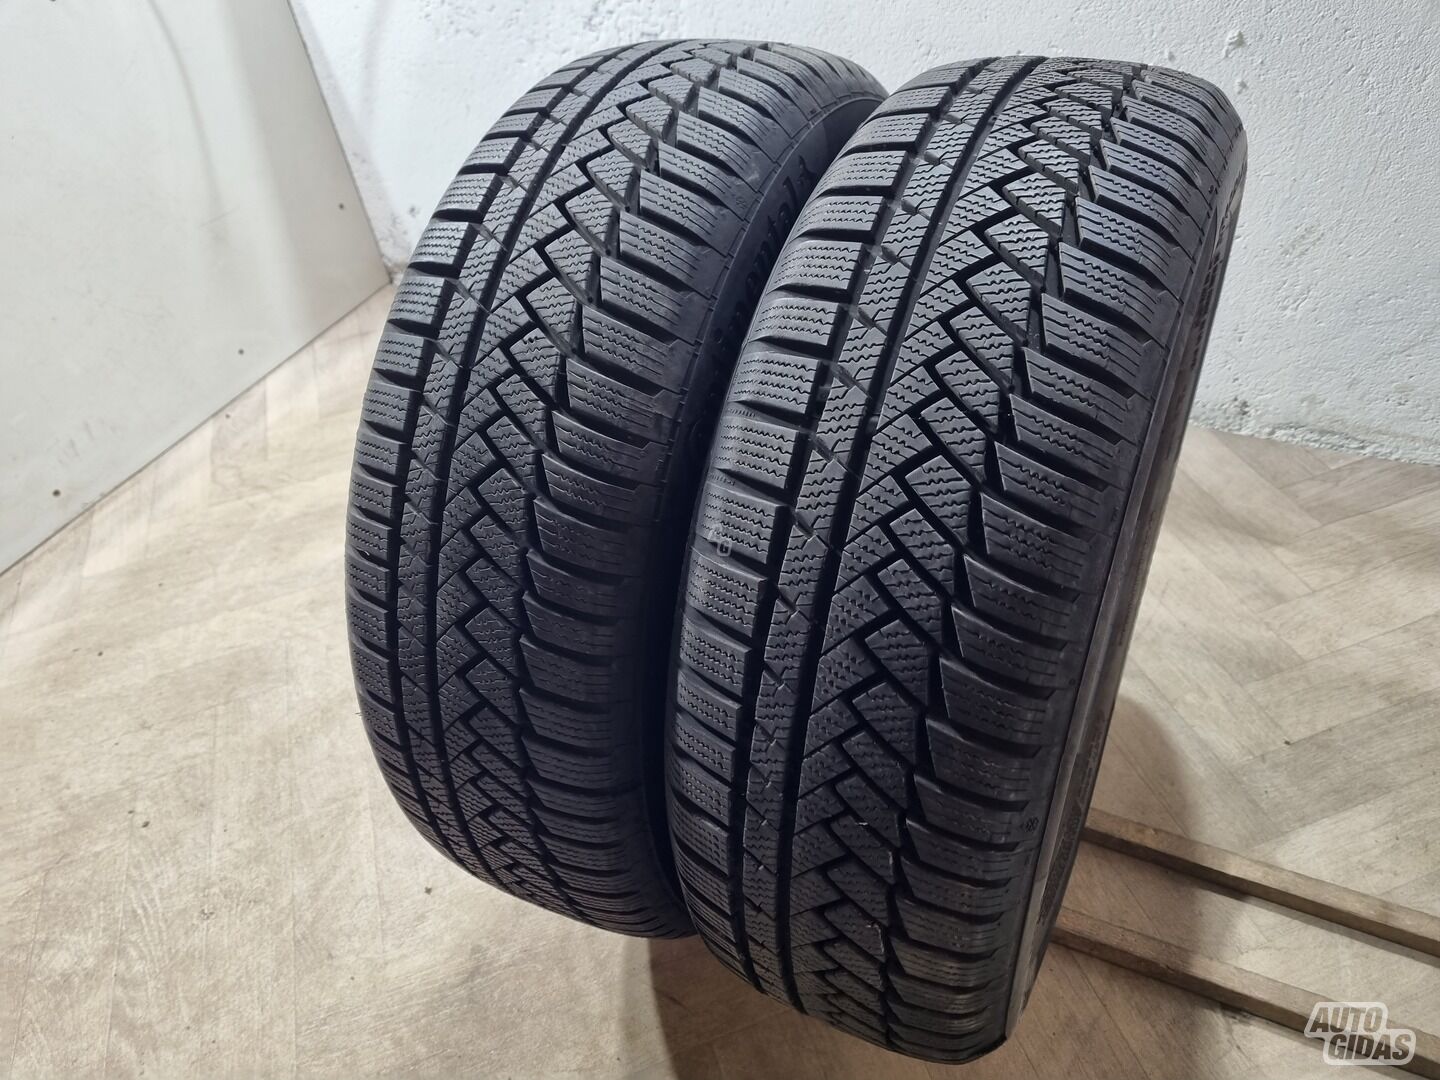 Continental 8mm, 2020m R16 universal tyres passanger car